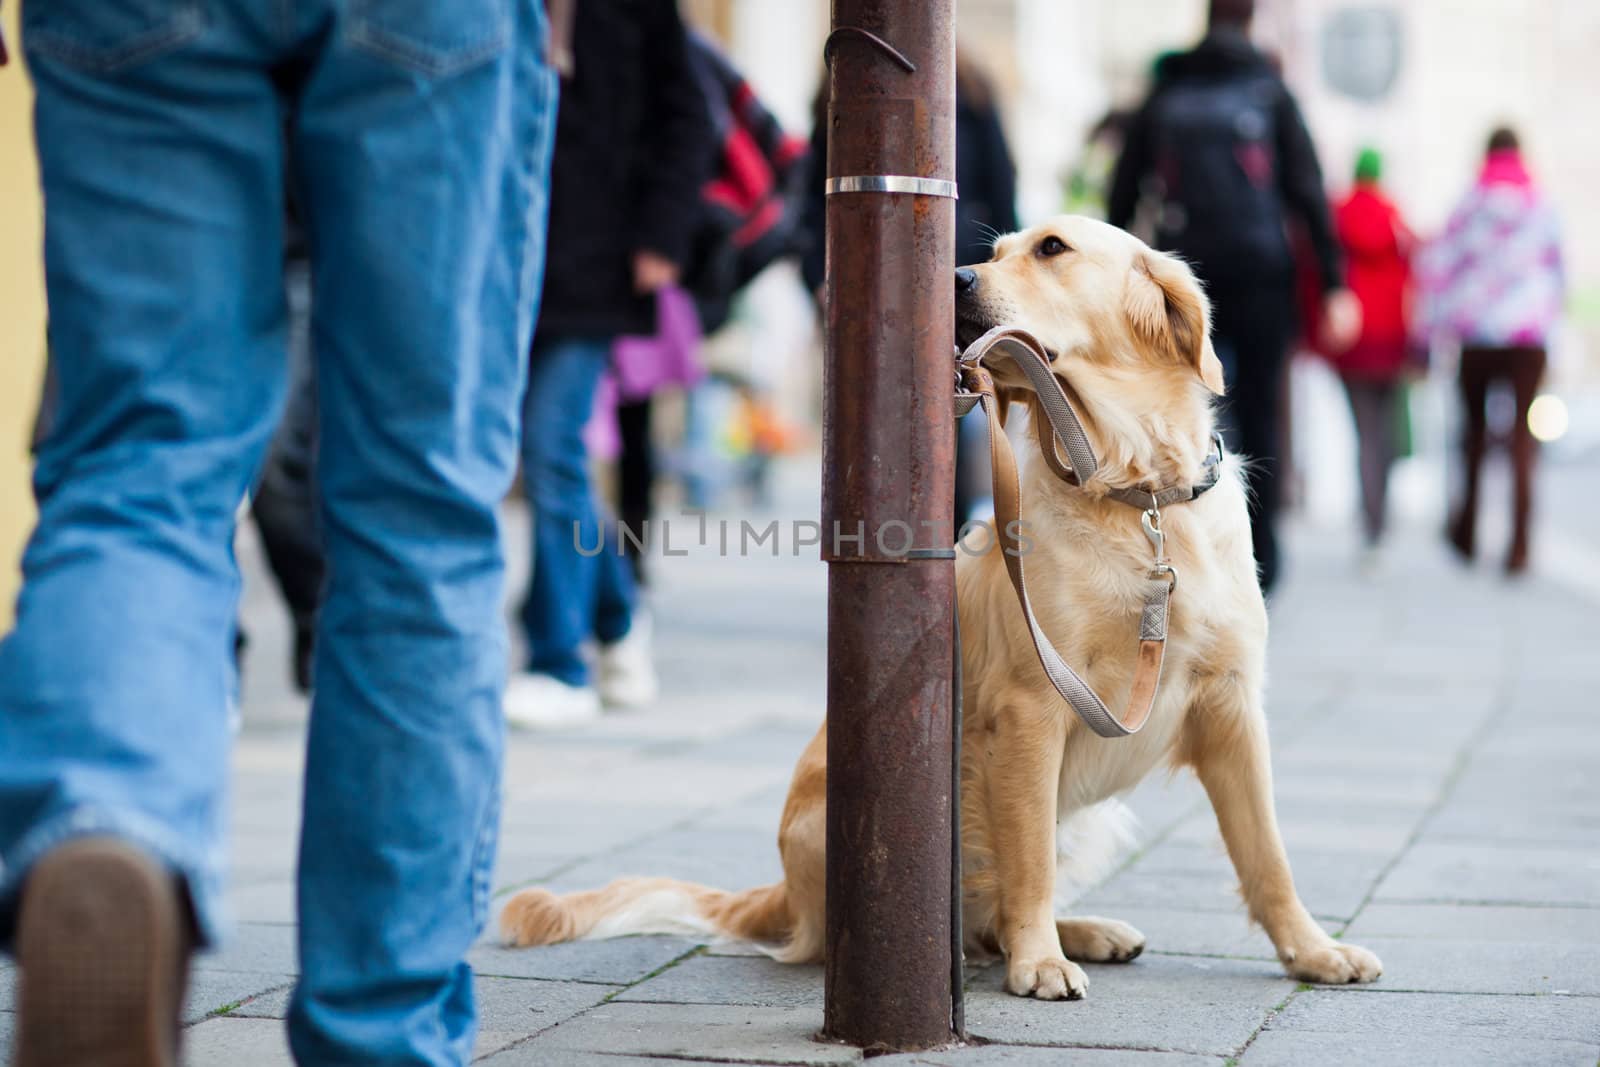 lonely cute dog waiting patiently for his master on a city stree by viktor_cap